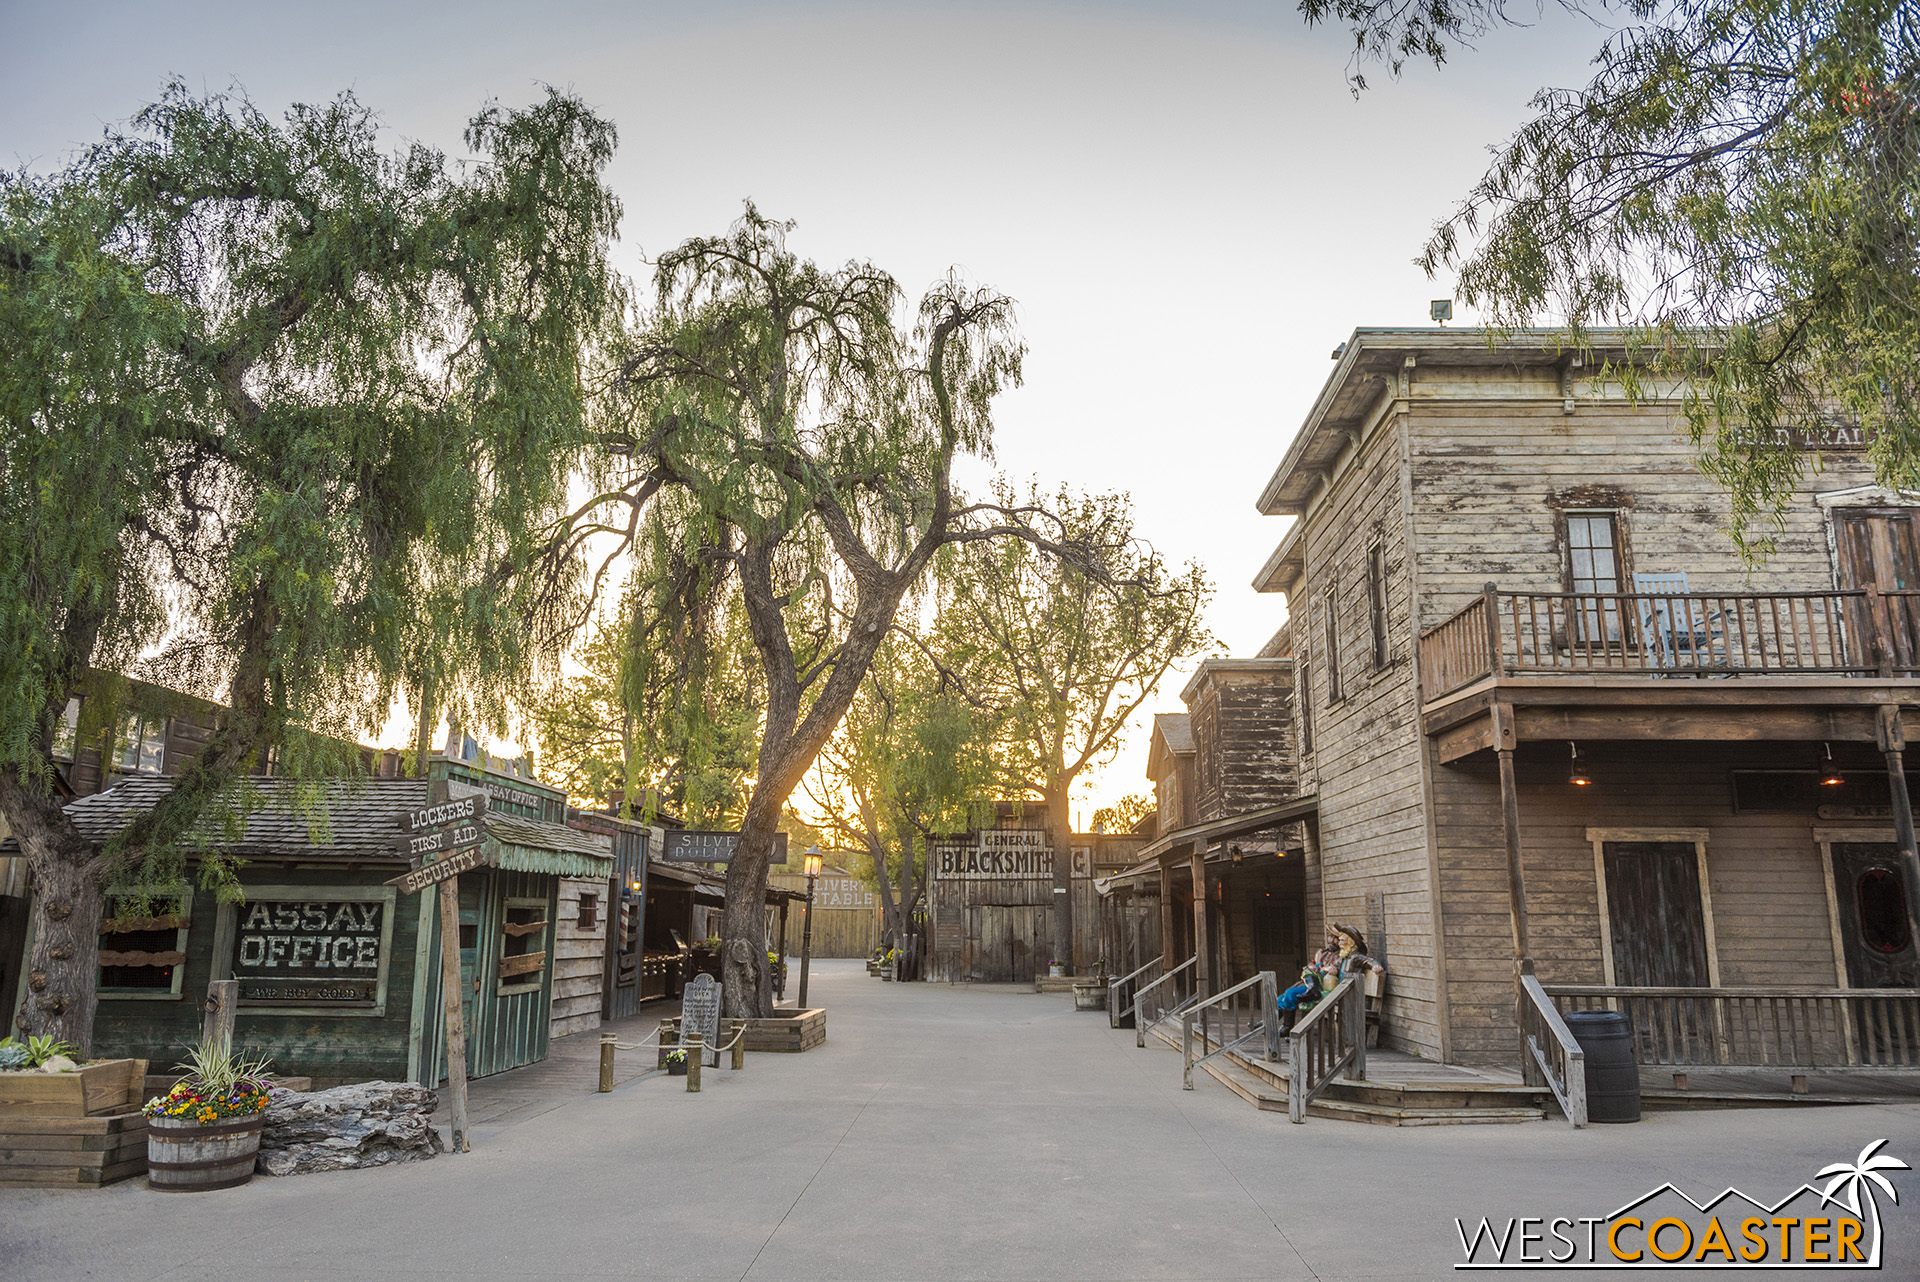  It’s not often that one can take empty photos of Knott’s Berry Farm. 